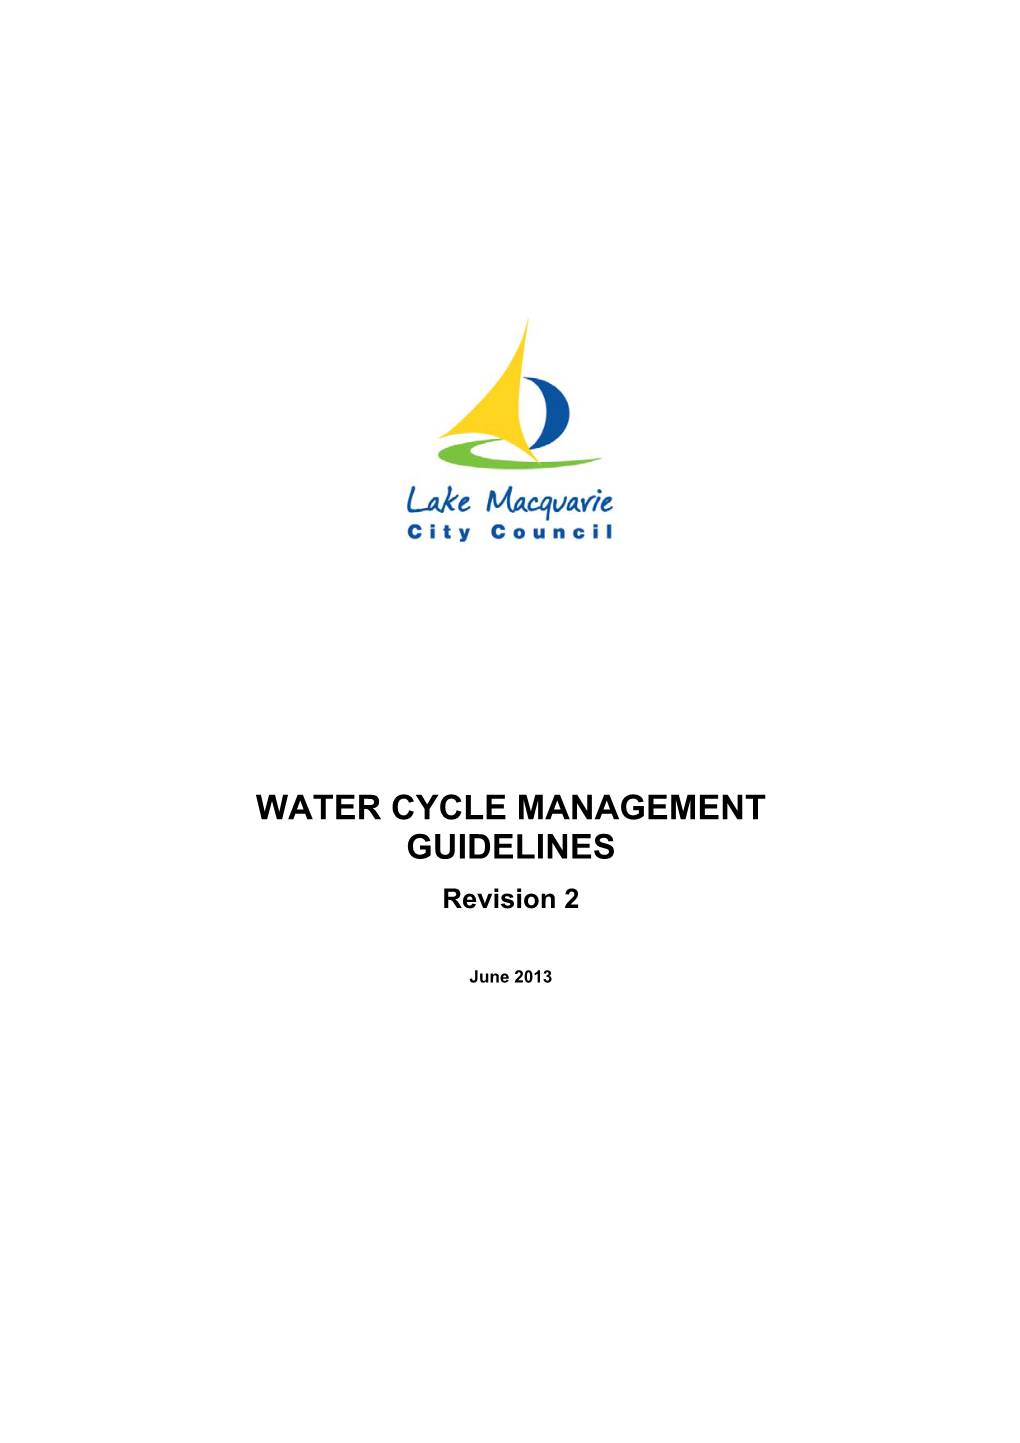 WATER CYCLE MANAGEMENT GUIDELINES Revision 2